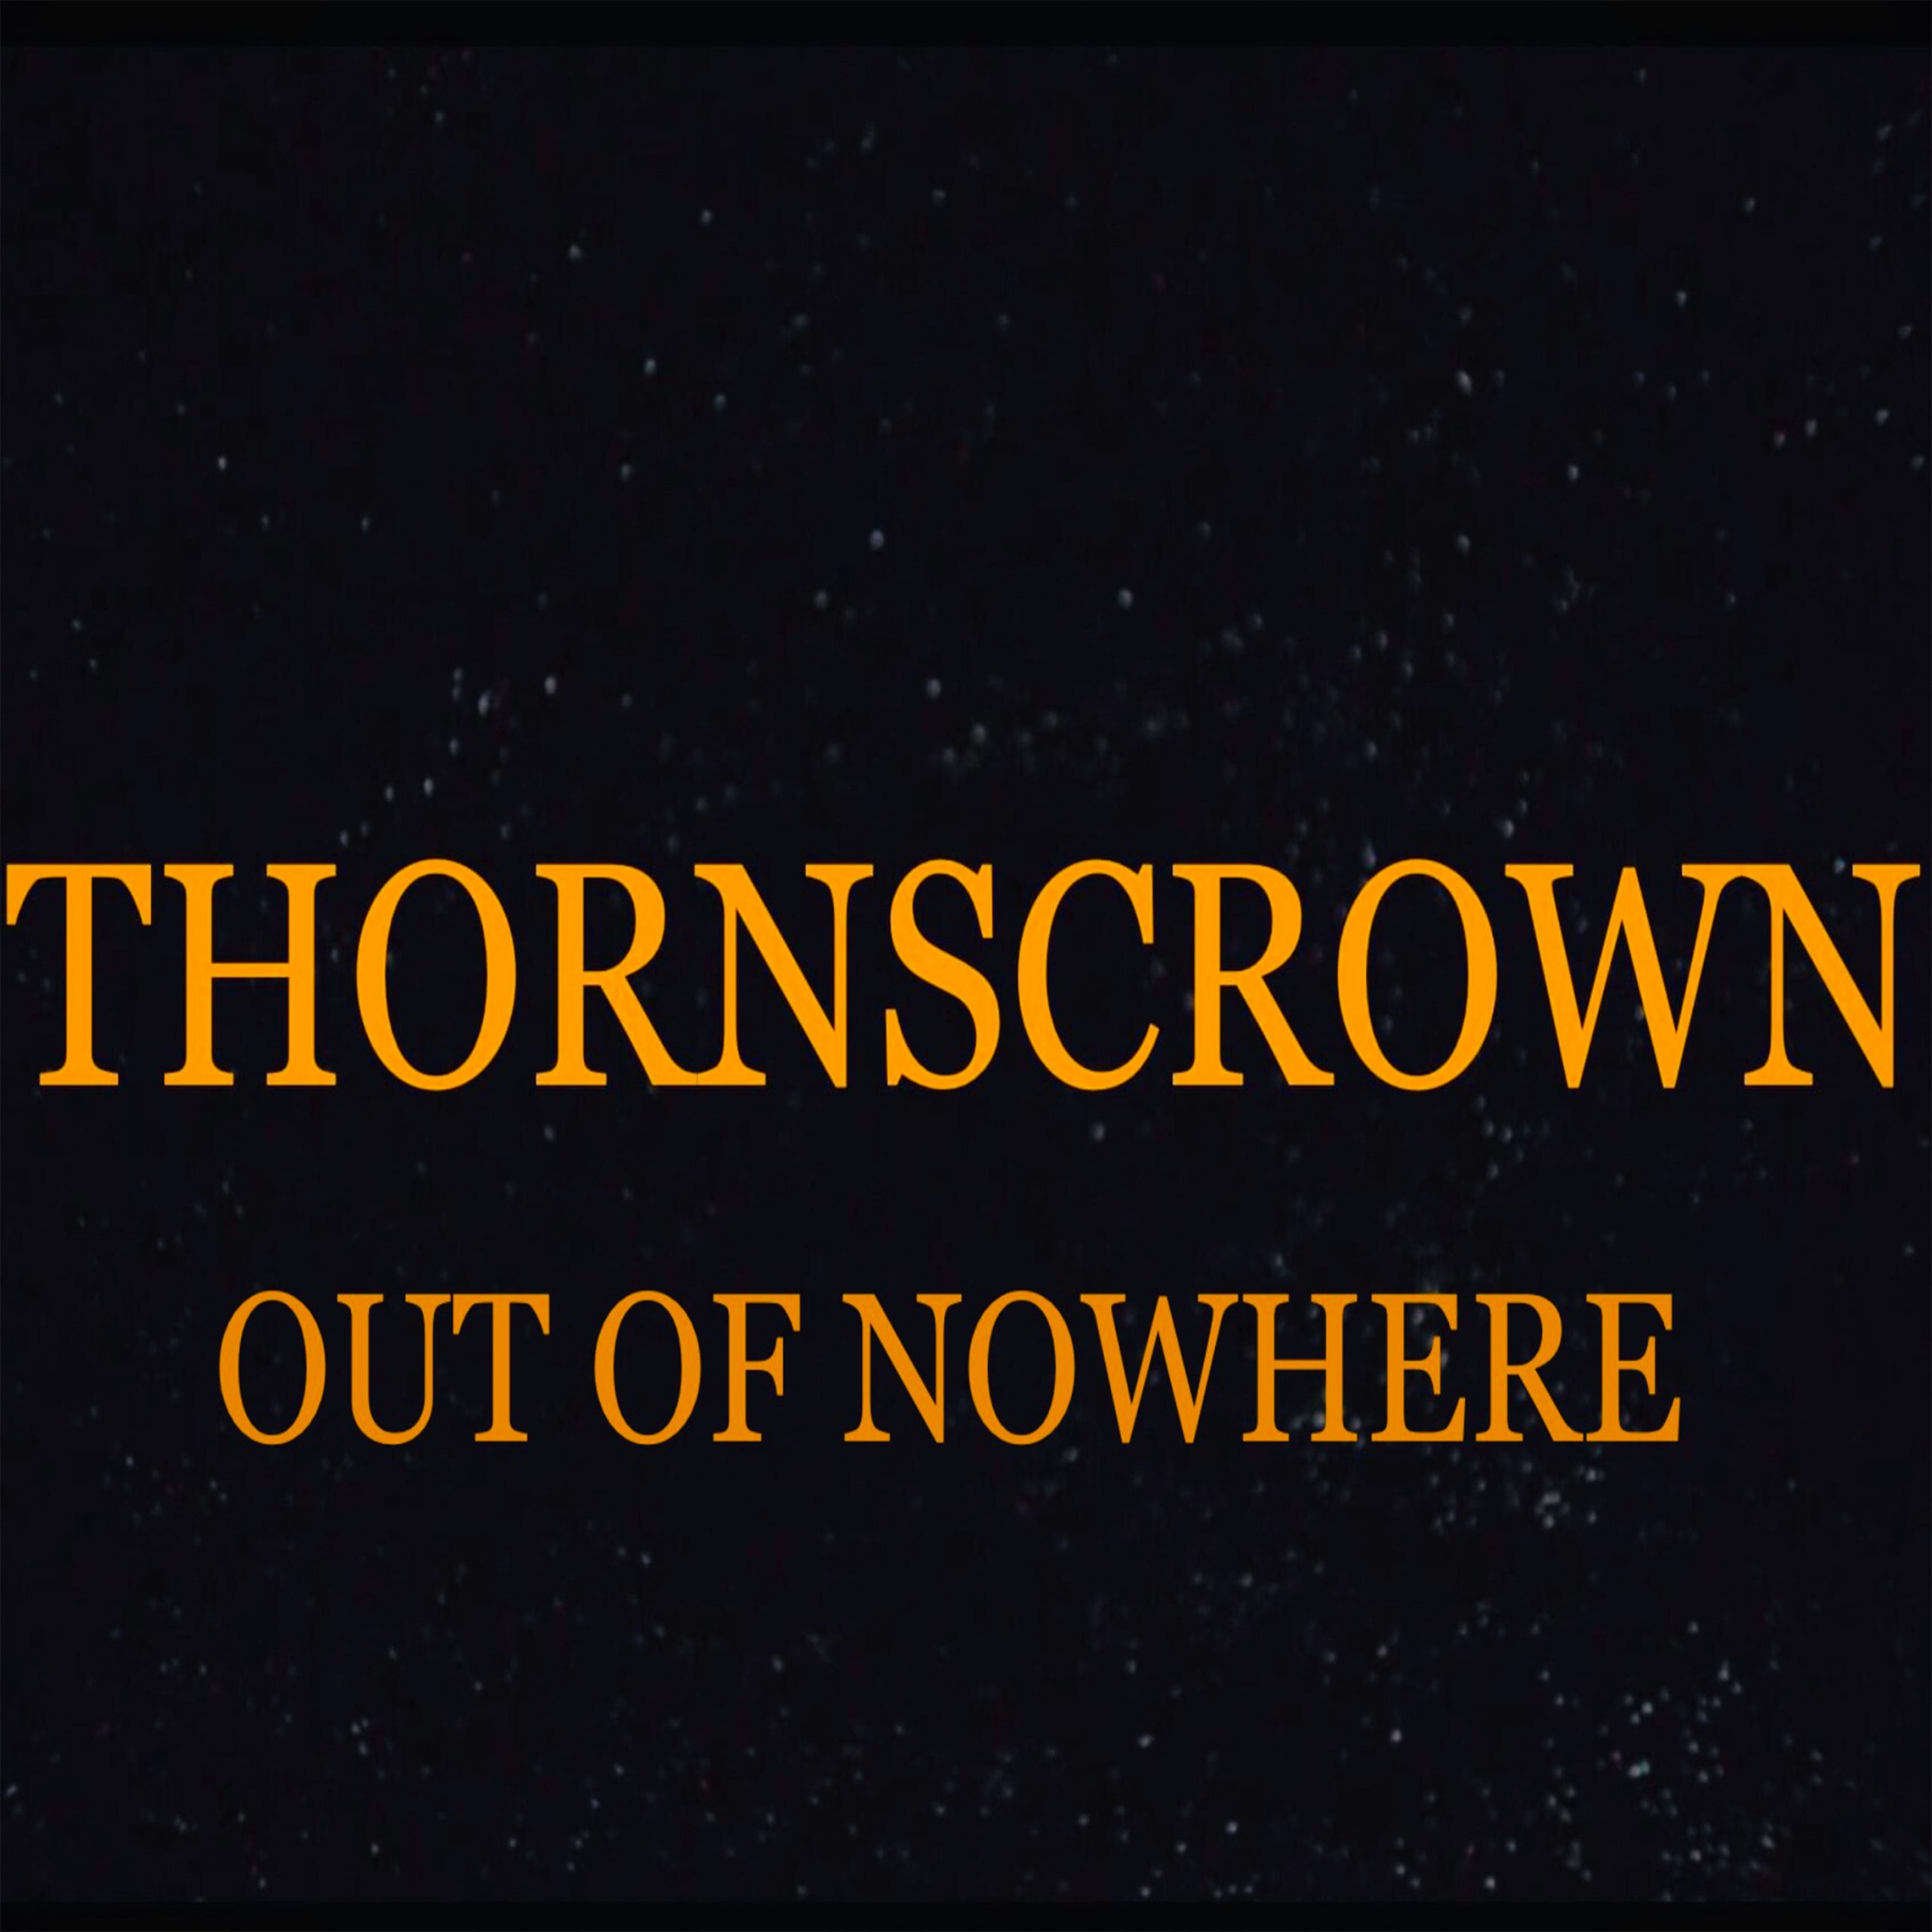 thornscrown / Out of nowhere